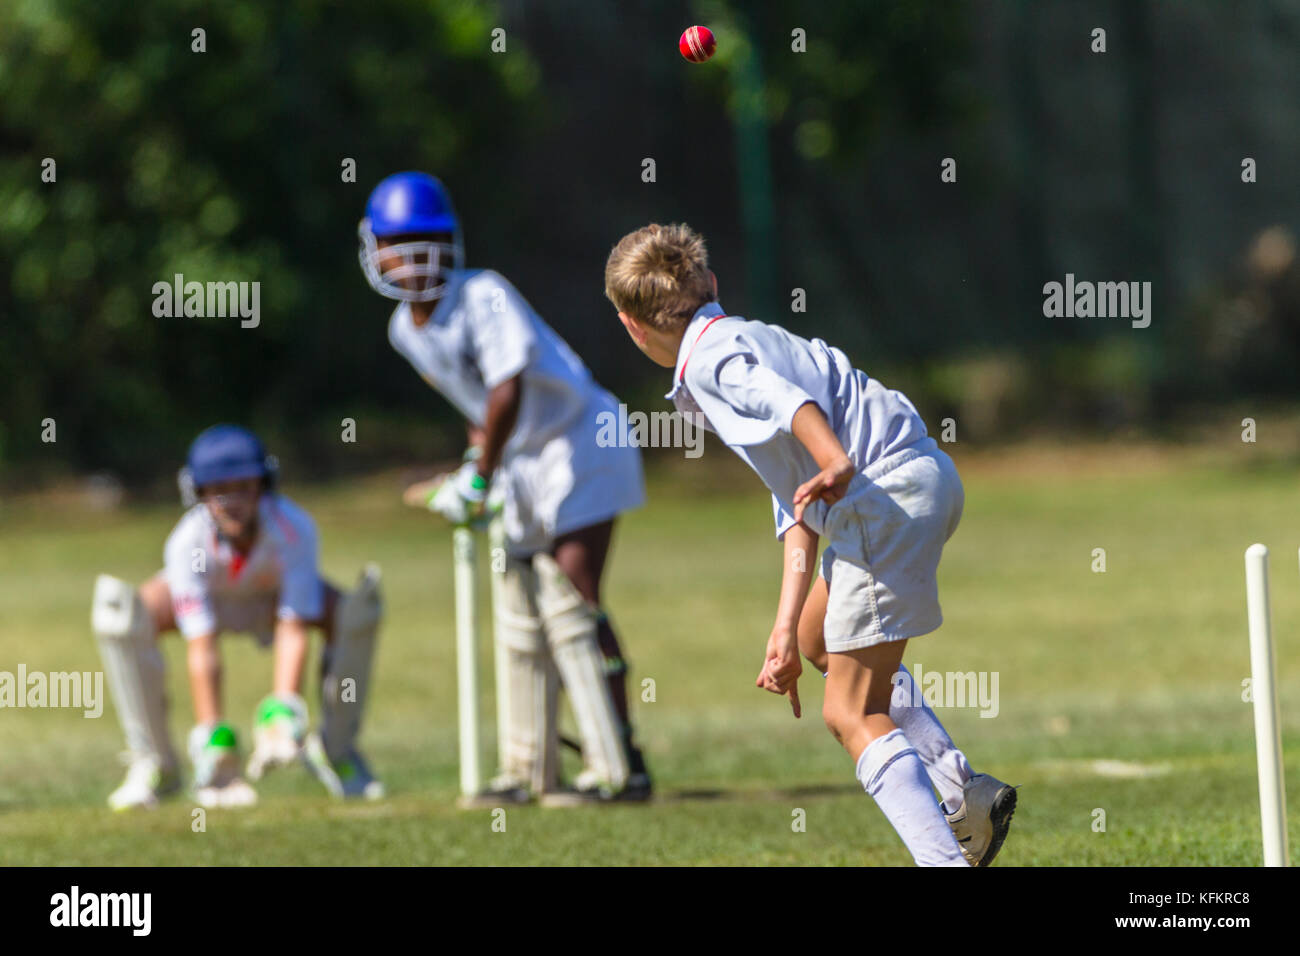 Cricket game juniors players bowler Batsman wicket keeper unidentified action abstract. Stock Photo